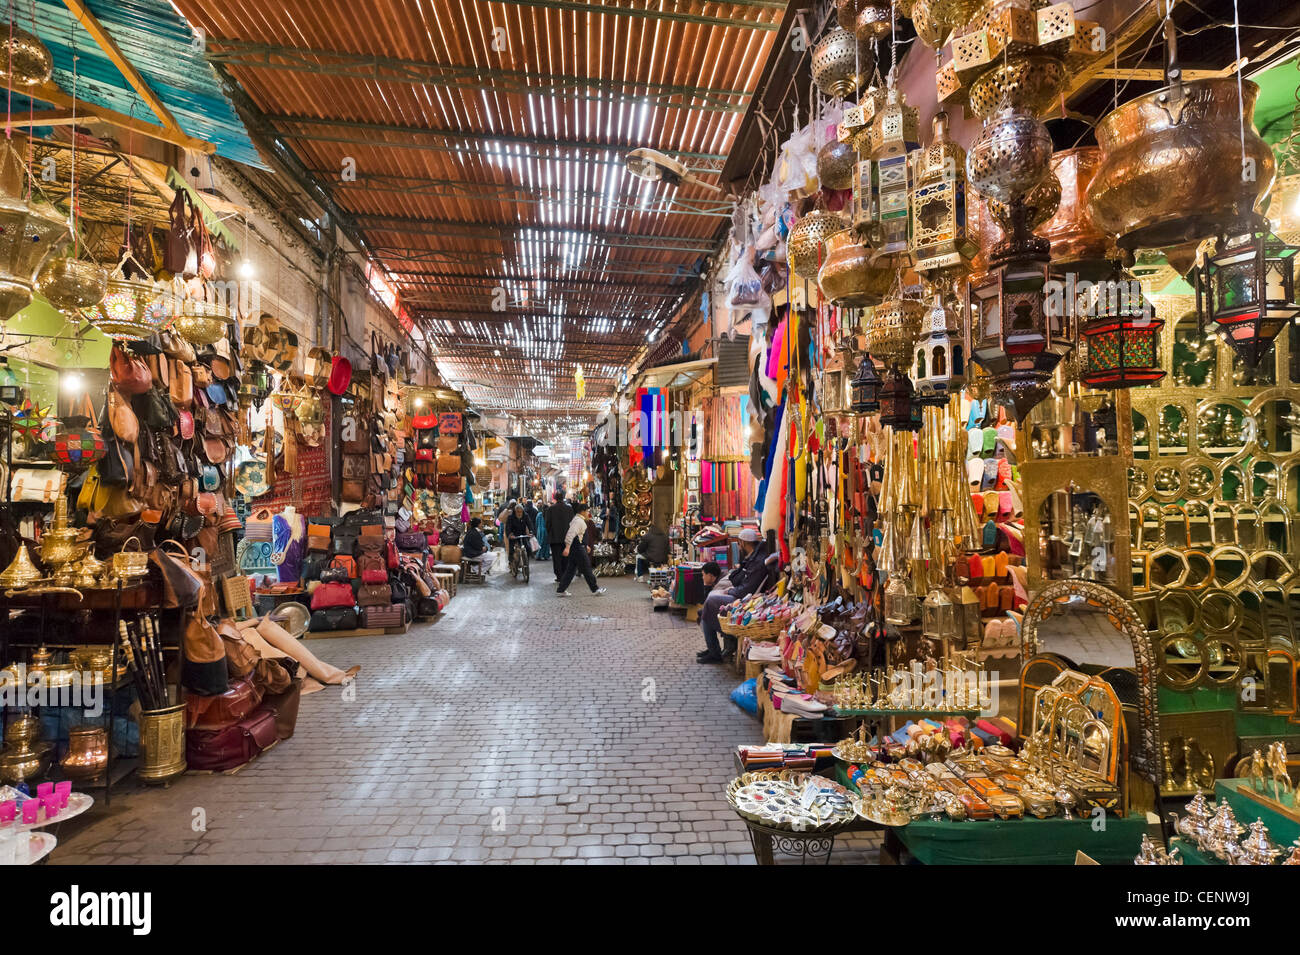 Shops in the souk, Medina, Marrakech, Morocco, North Africa Stock Photo